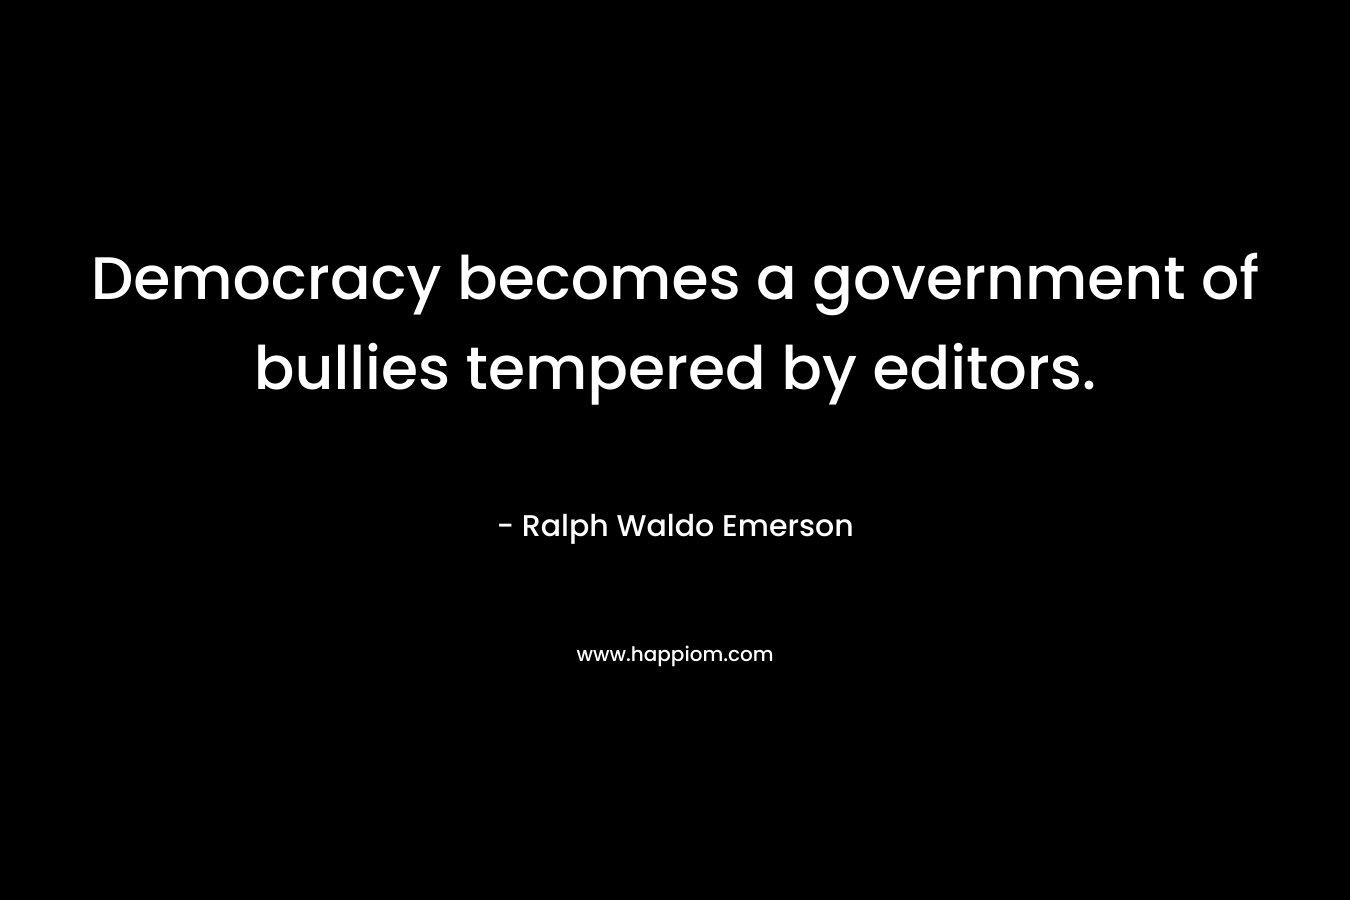 Democracy becomes a government of bullies tempered by editors. – Ralph Waldo Emerson